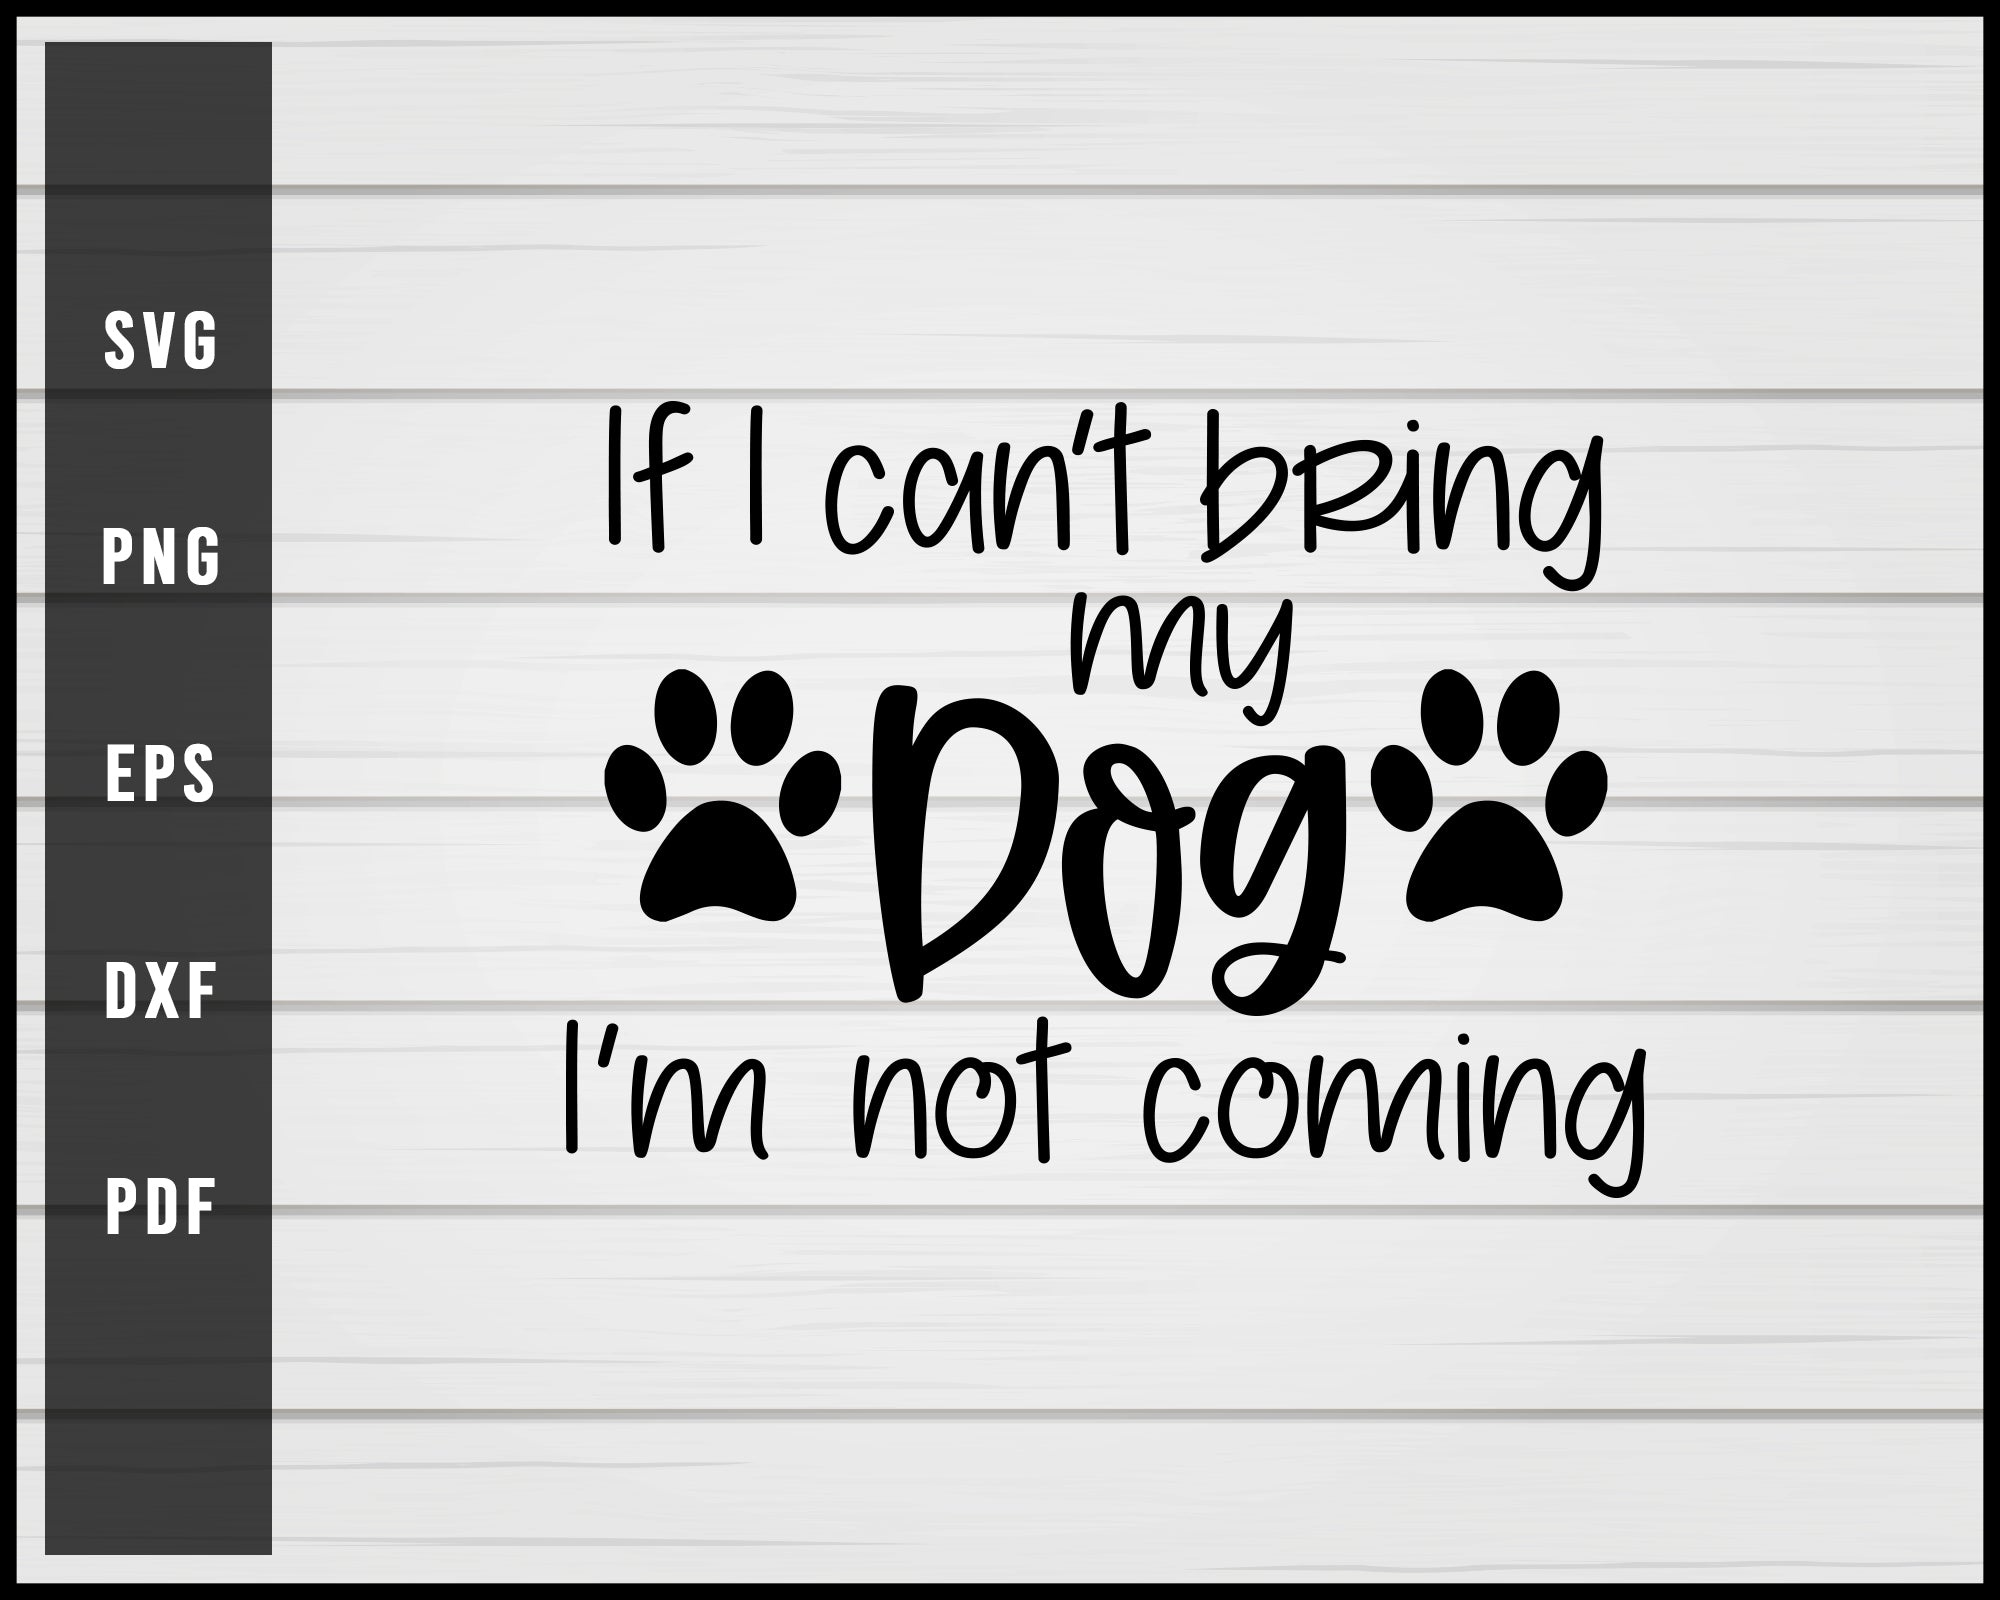 If I cant bring my dog svg png eps Silhouette Designs For Cricut And Printable Files